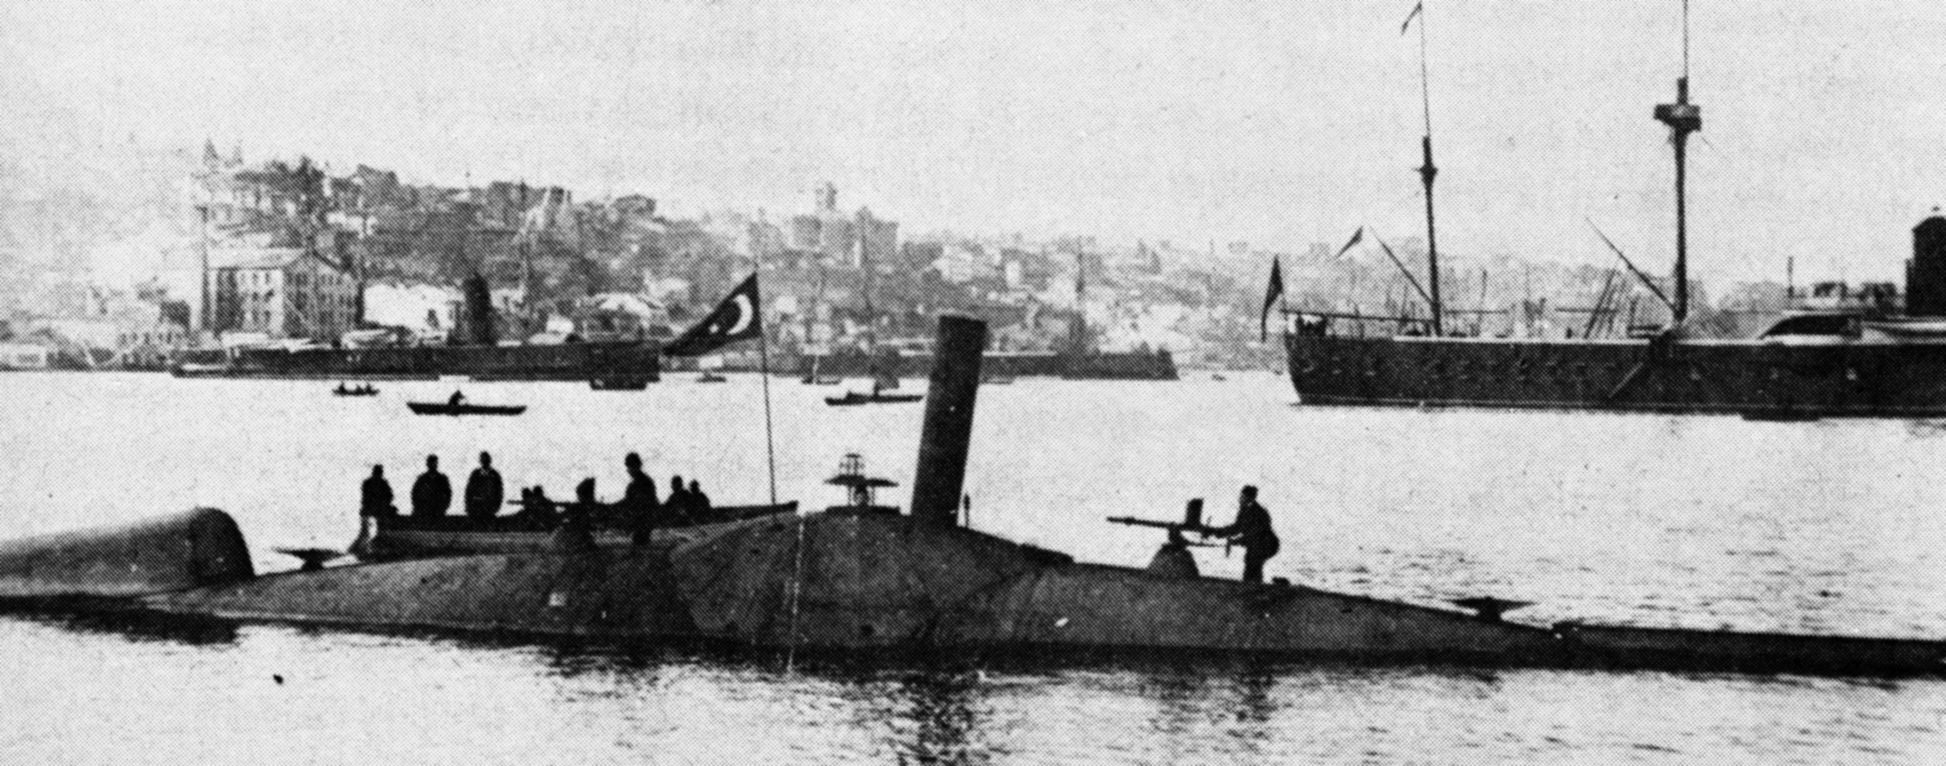 Nordenfeldt III submarine, photographed in 1883 in the Ottoman Navy, fired the first underwater torpedo. 